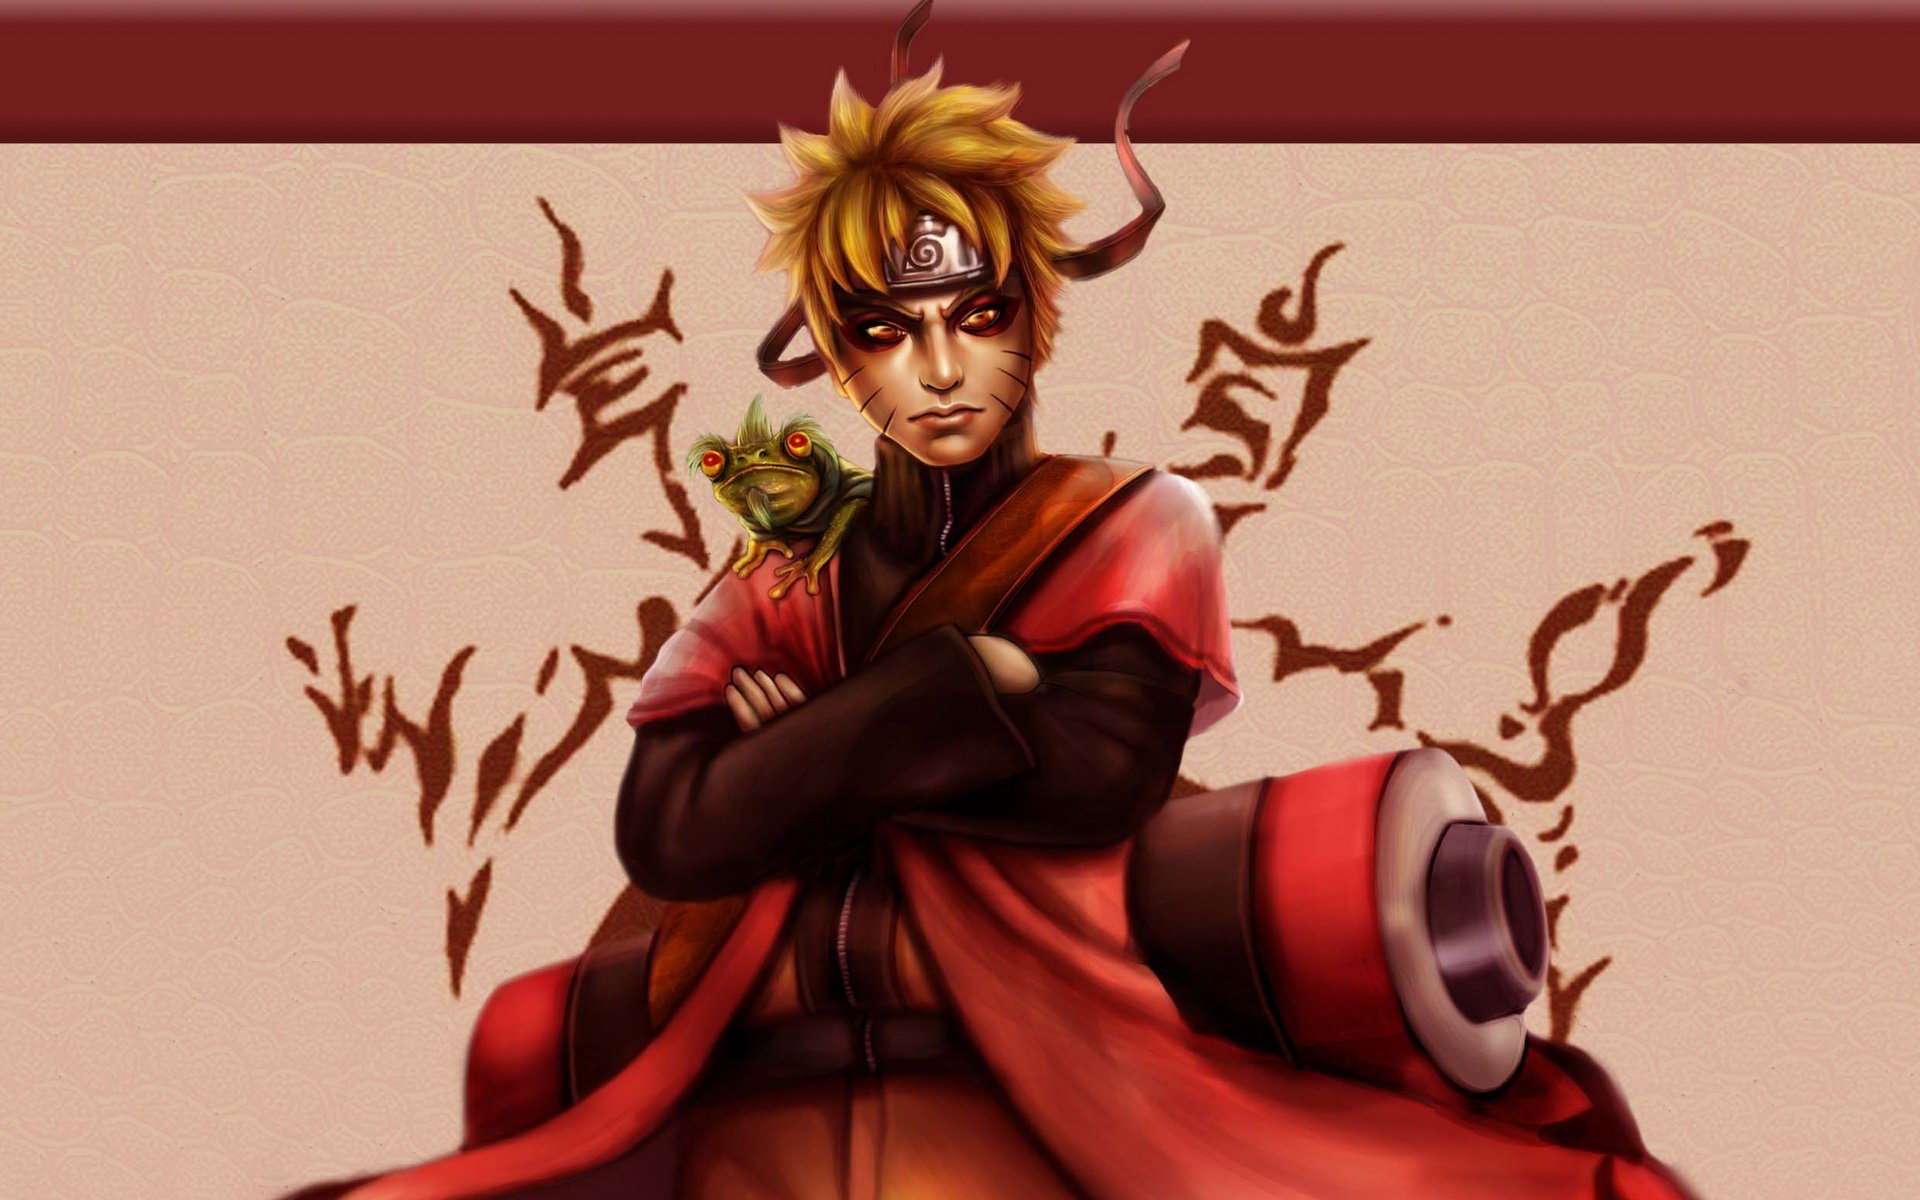  3D  Naruto  Wallpapers  Group 79 